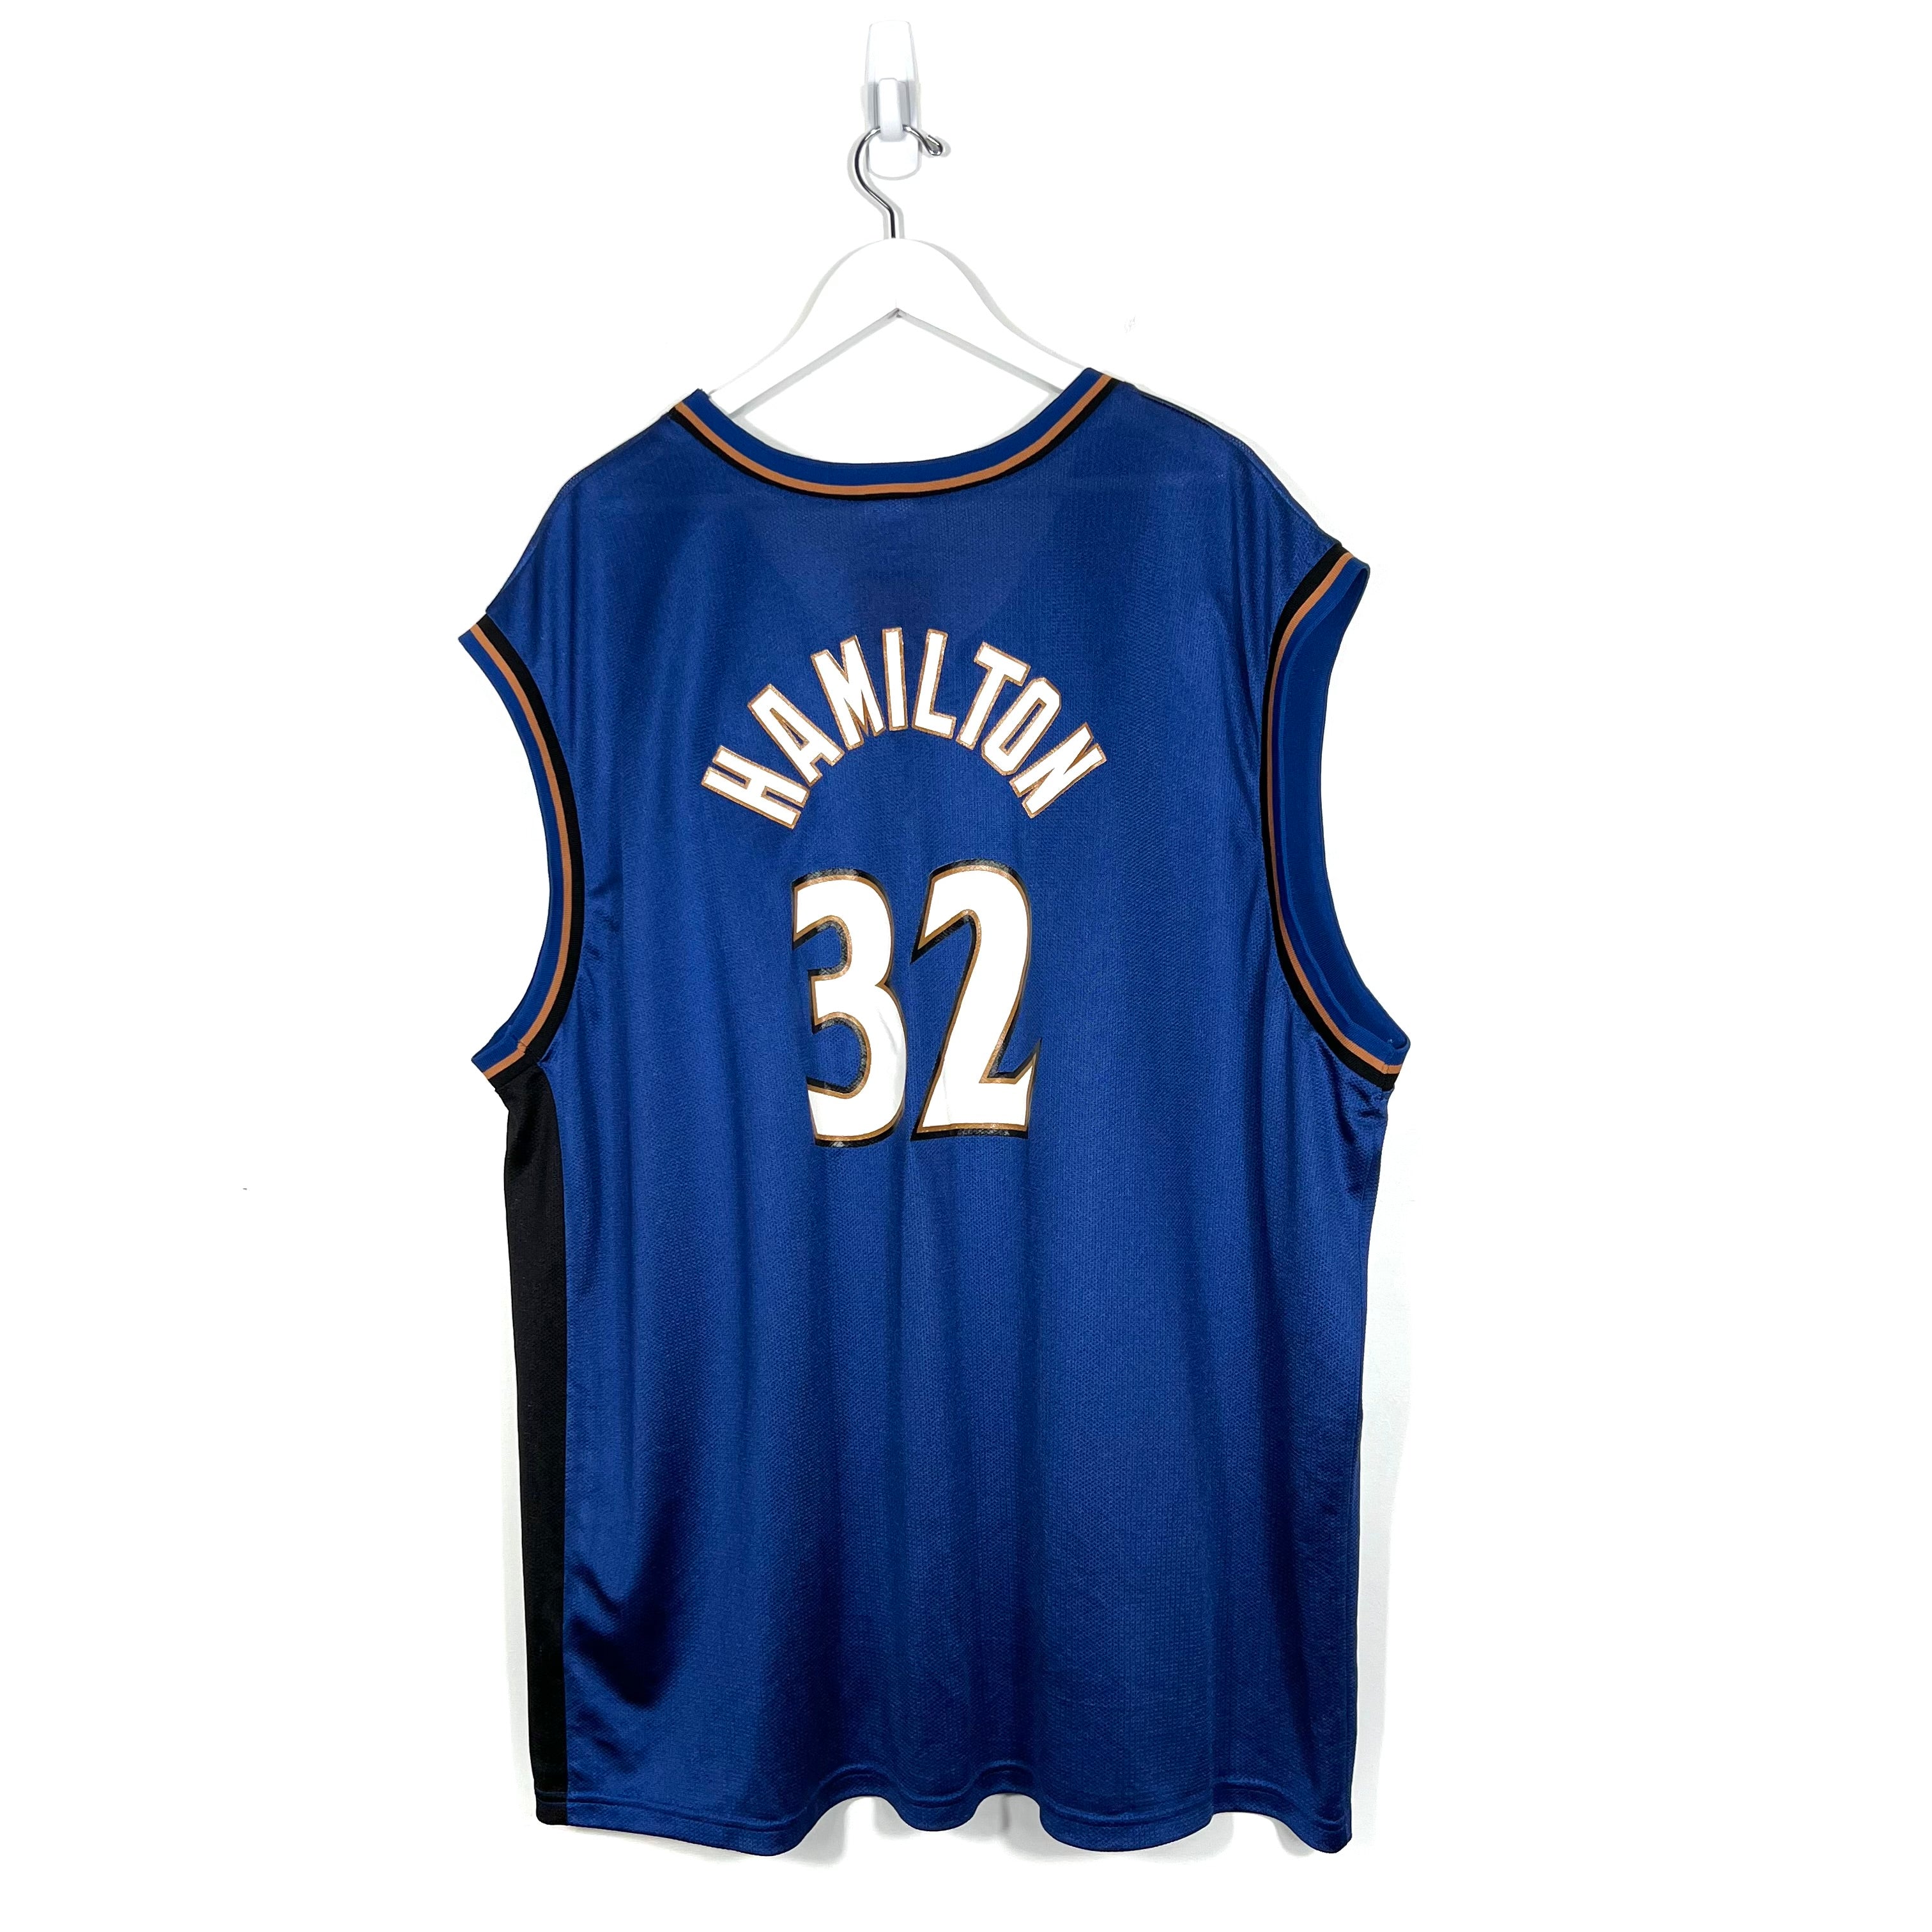 Number 33 2021 Grizzlies-themed Jersey